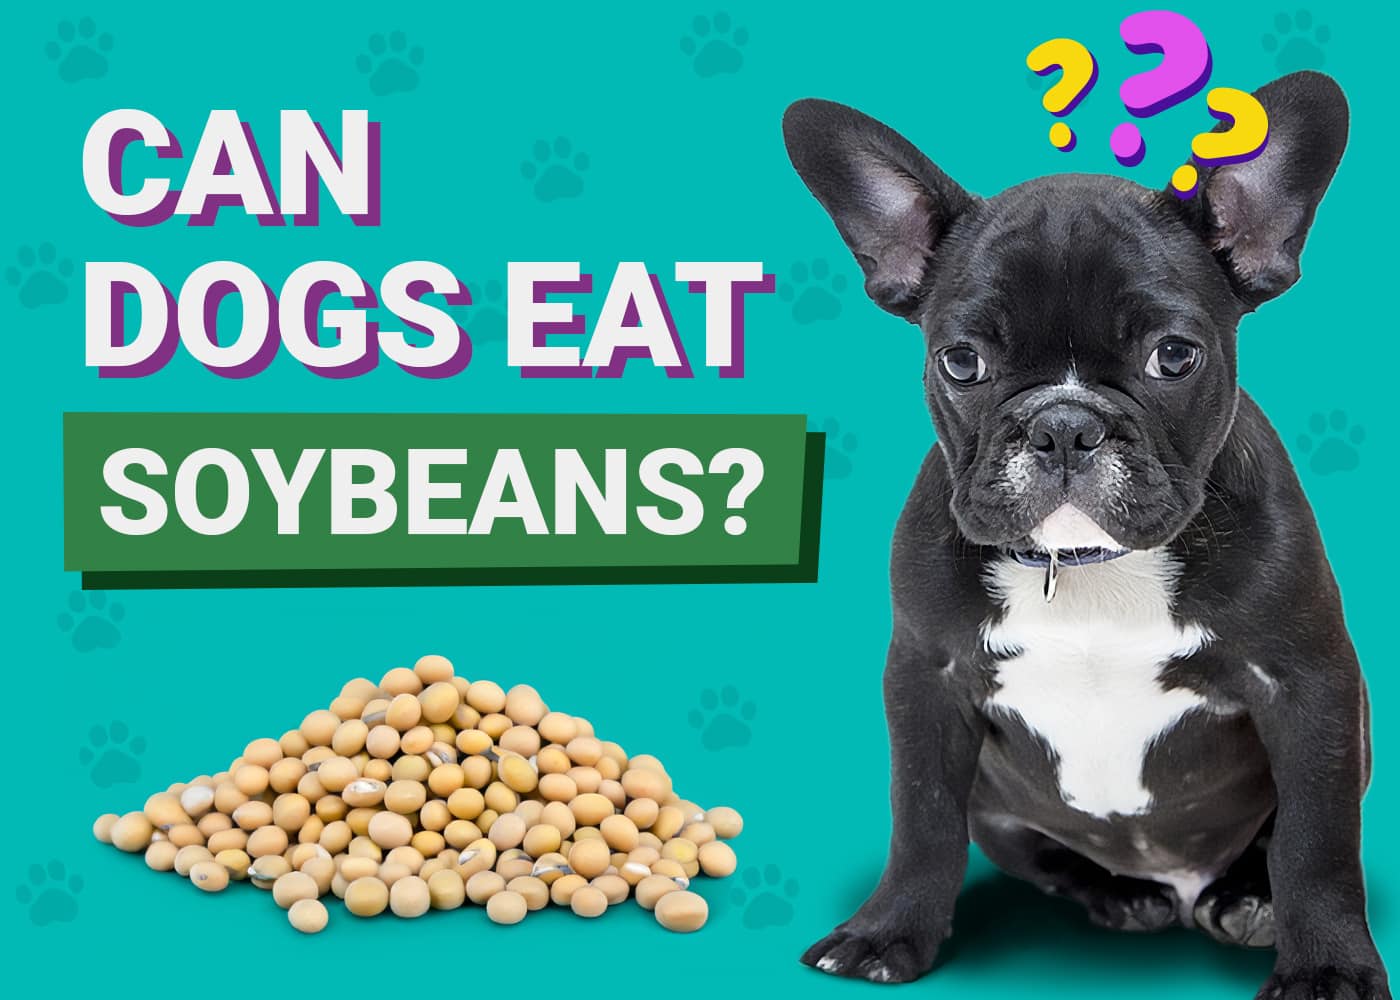 Can Dogs Eat Soybeans